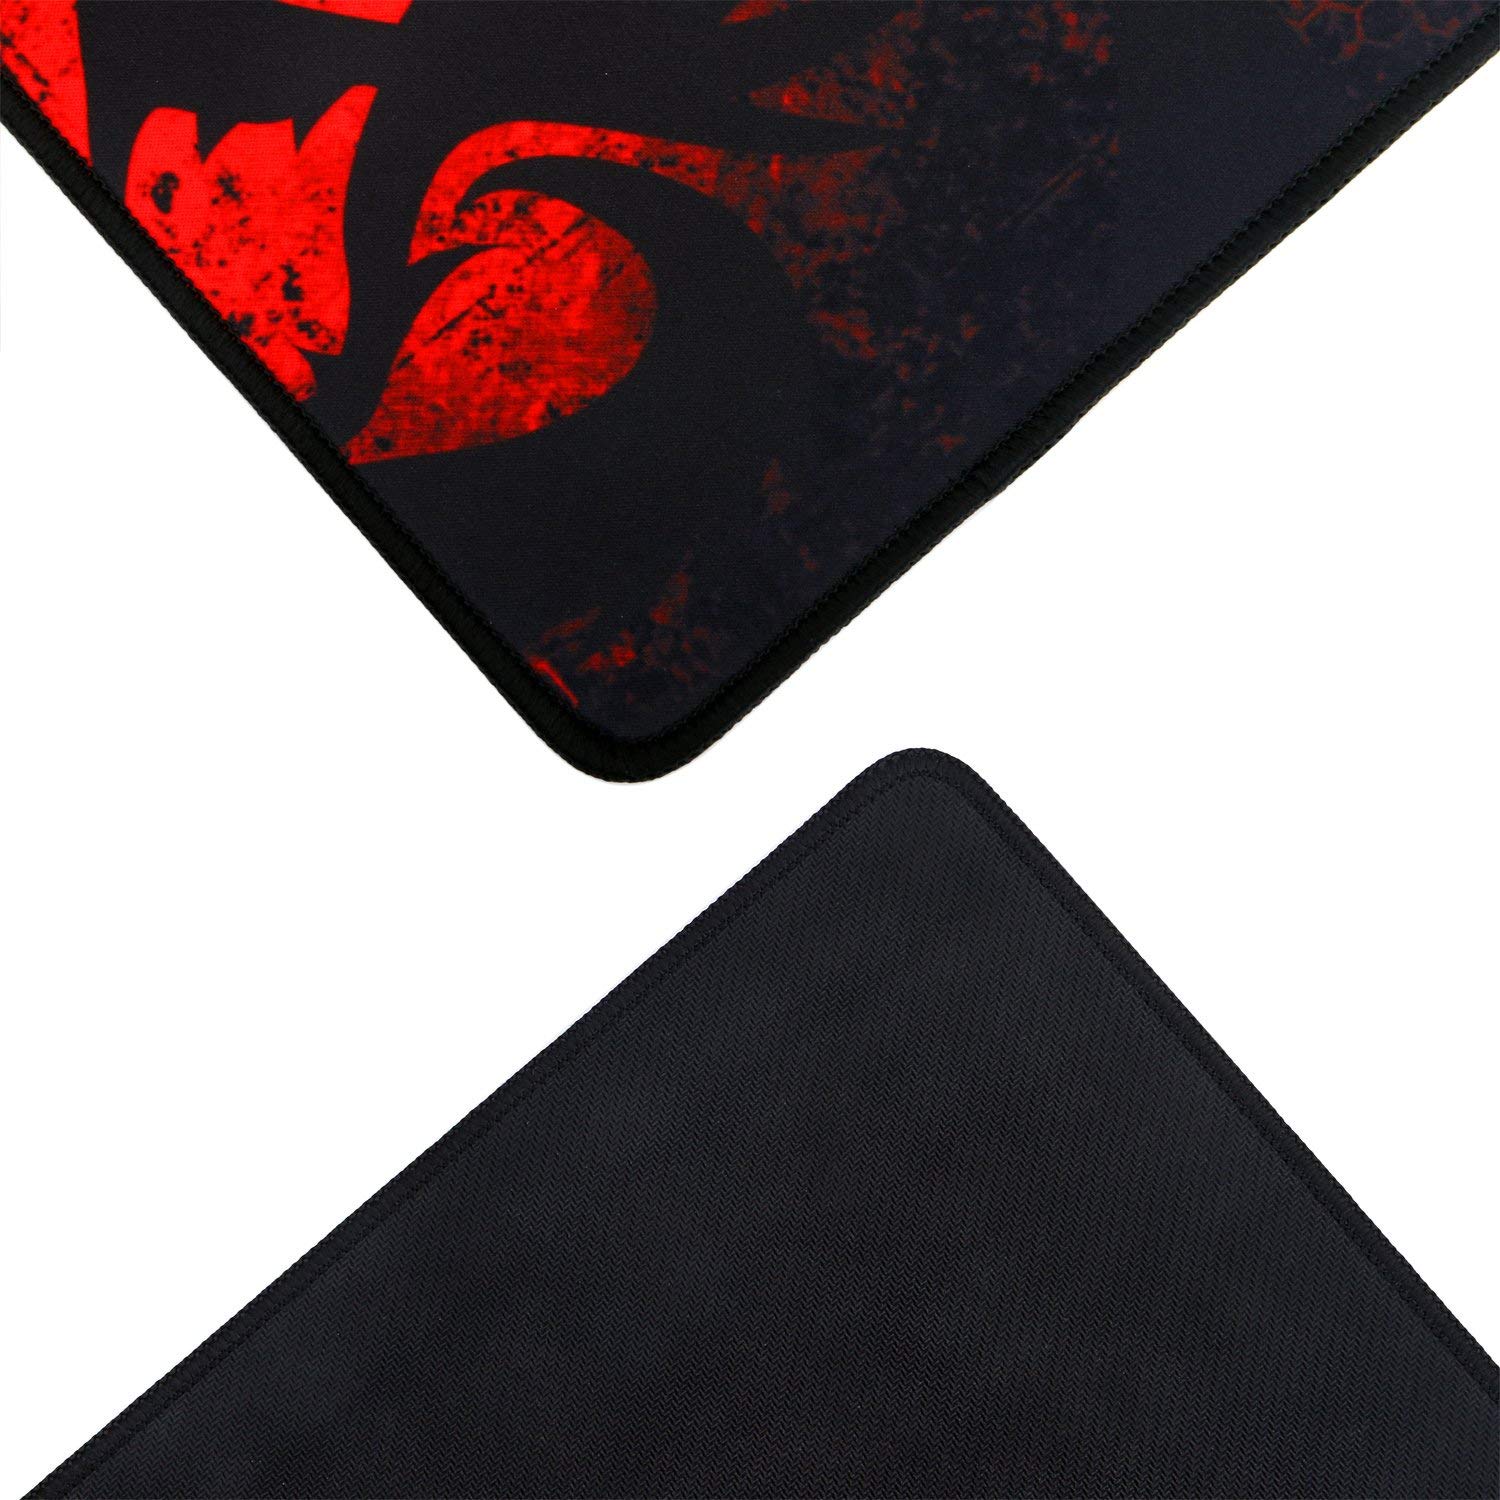 redragon-pisces-gaming-mouse-pad-330x260x3mm-5-image